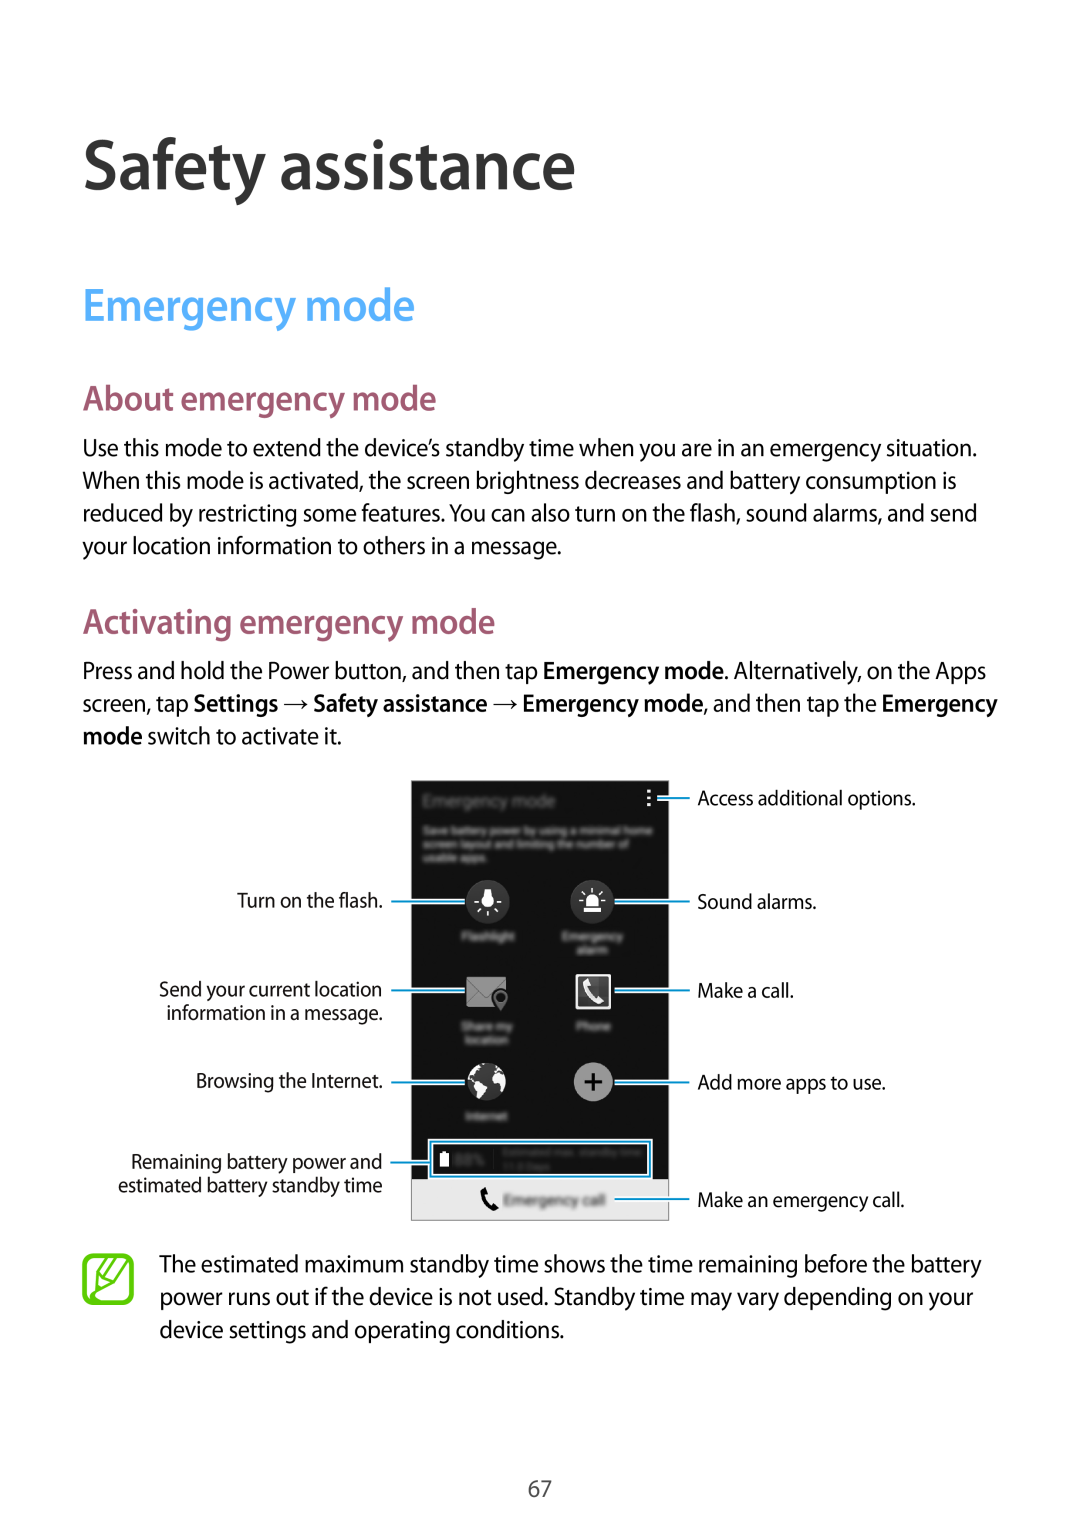 Samsung SM-A300FZKUXEF, SM-A300FZDDSEE Safety assistance, Emergency mode, About emergency mode, Activating emergency mode 